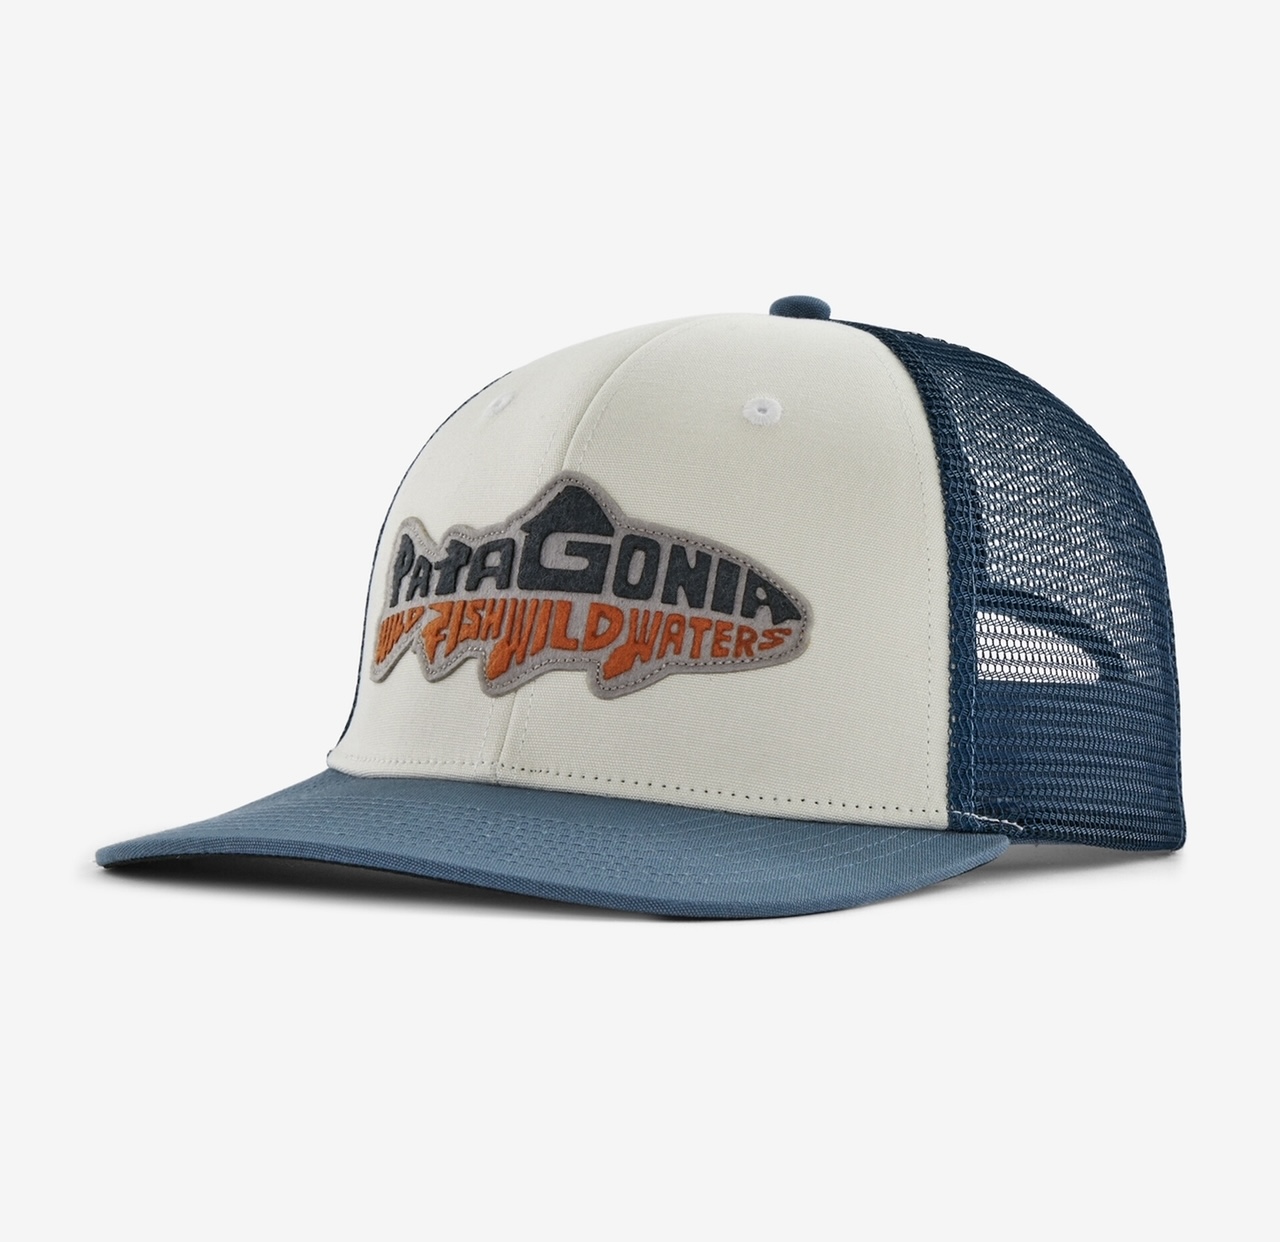 Patagonia Take a Stand Trucker Hat - Wild Waterline: Utility Blue